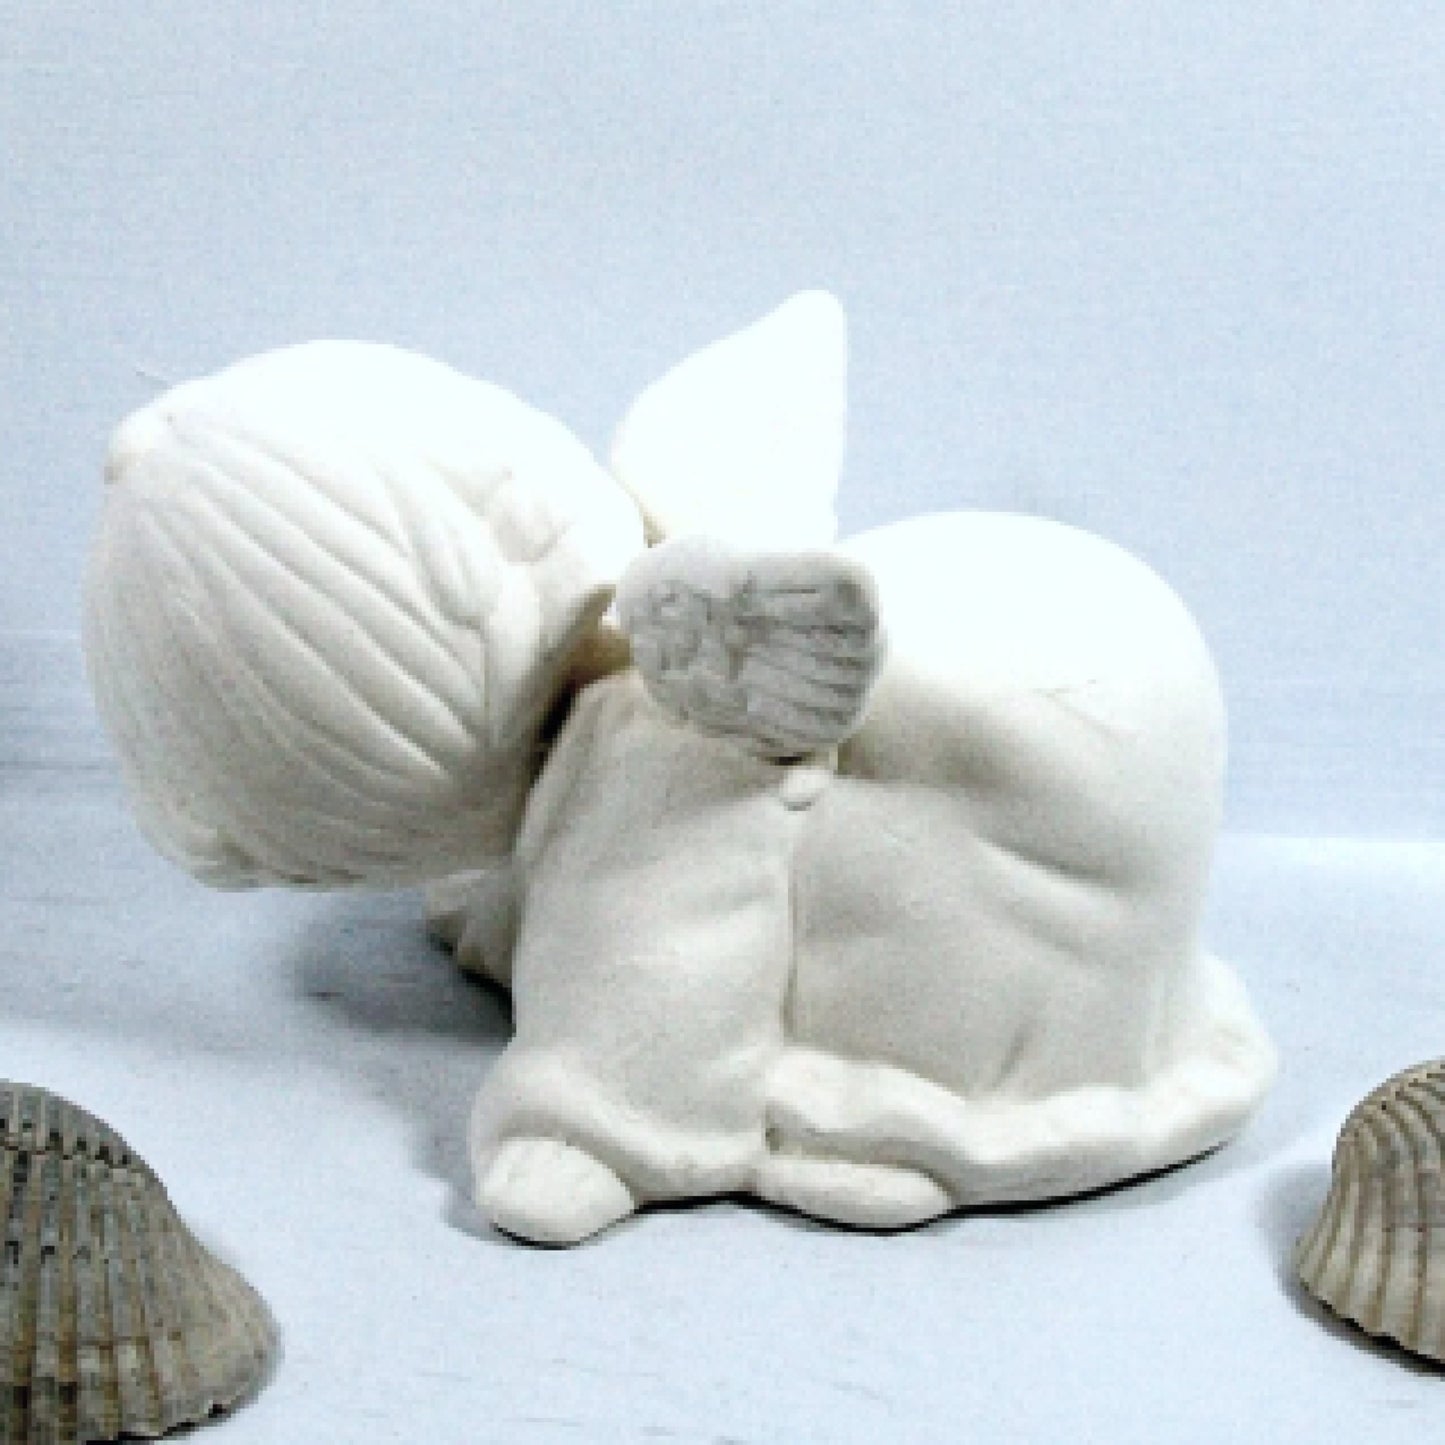 Handmade Ready to paint ceramic playful angel figurine showing side and head turned away from the camera.